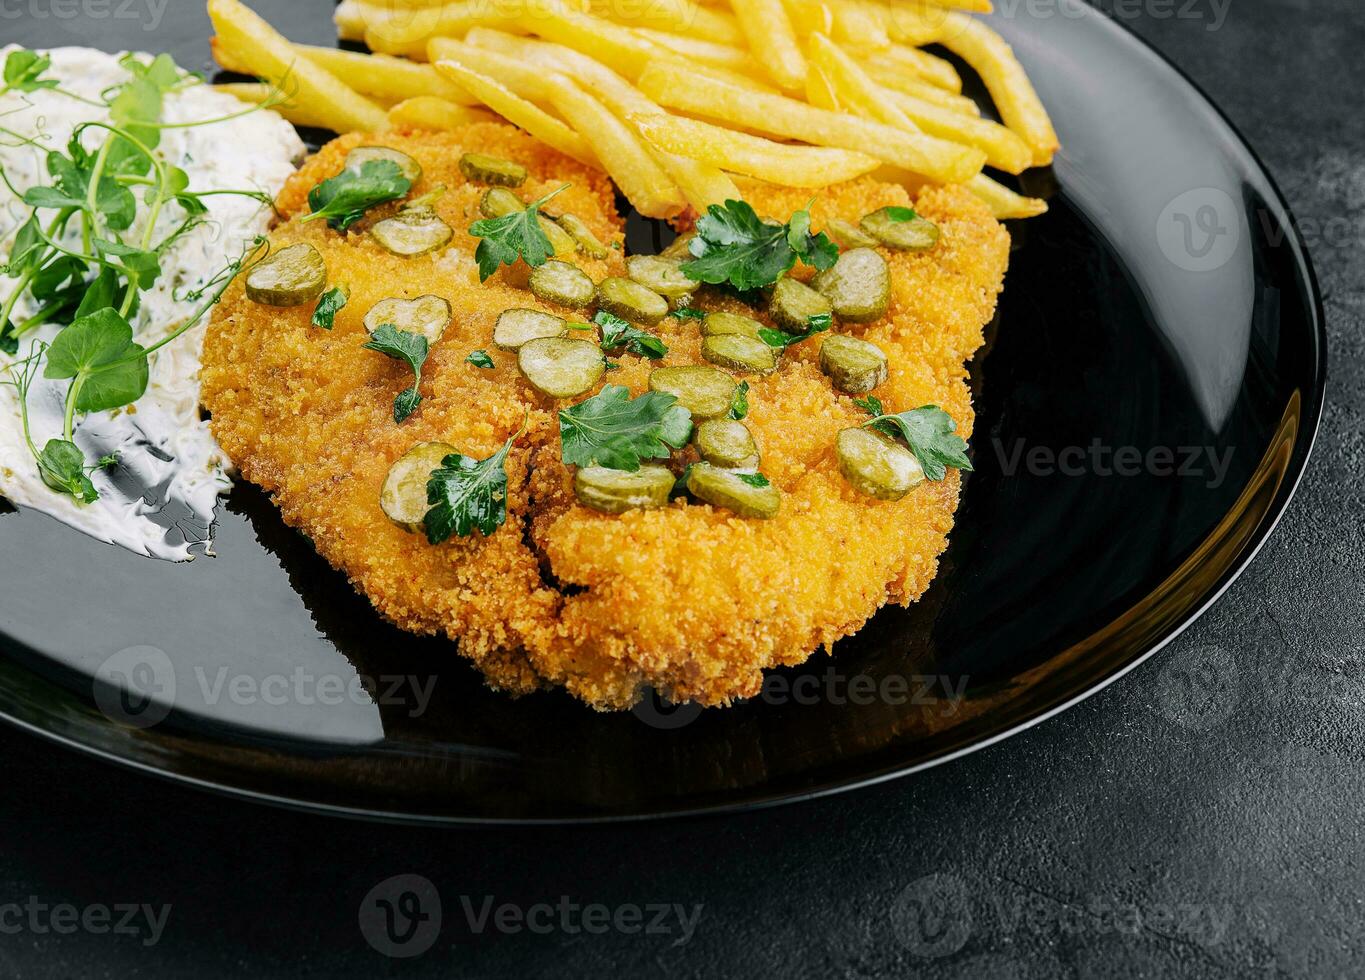 Delicious wiener hunter schnitzel with sauce and french fries close-up on a plate photo